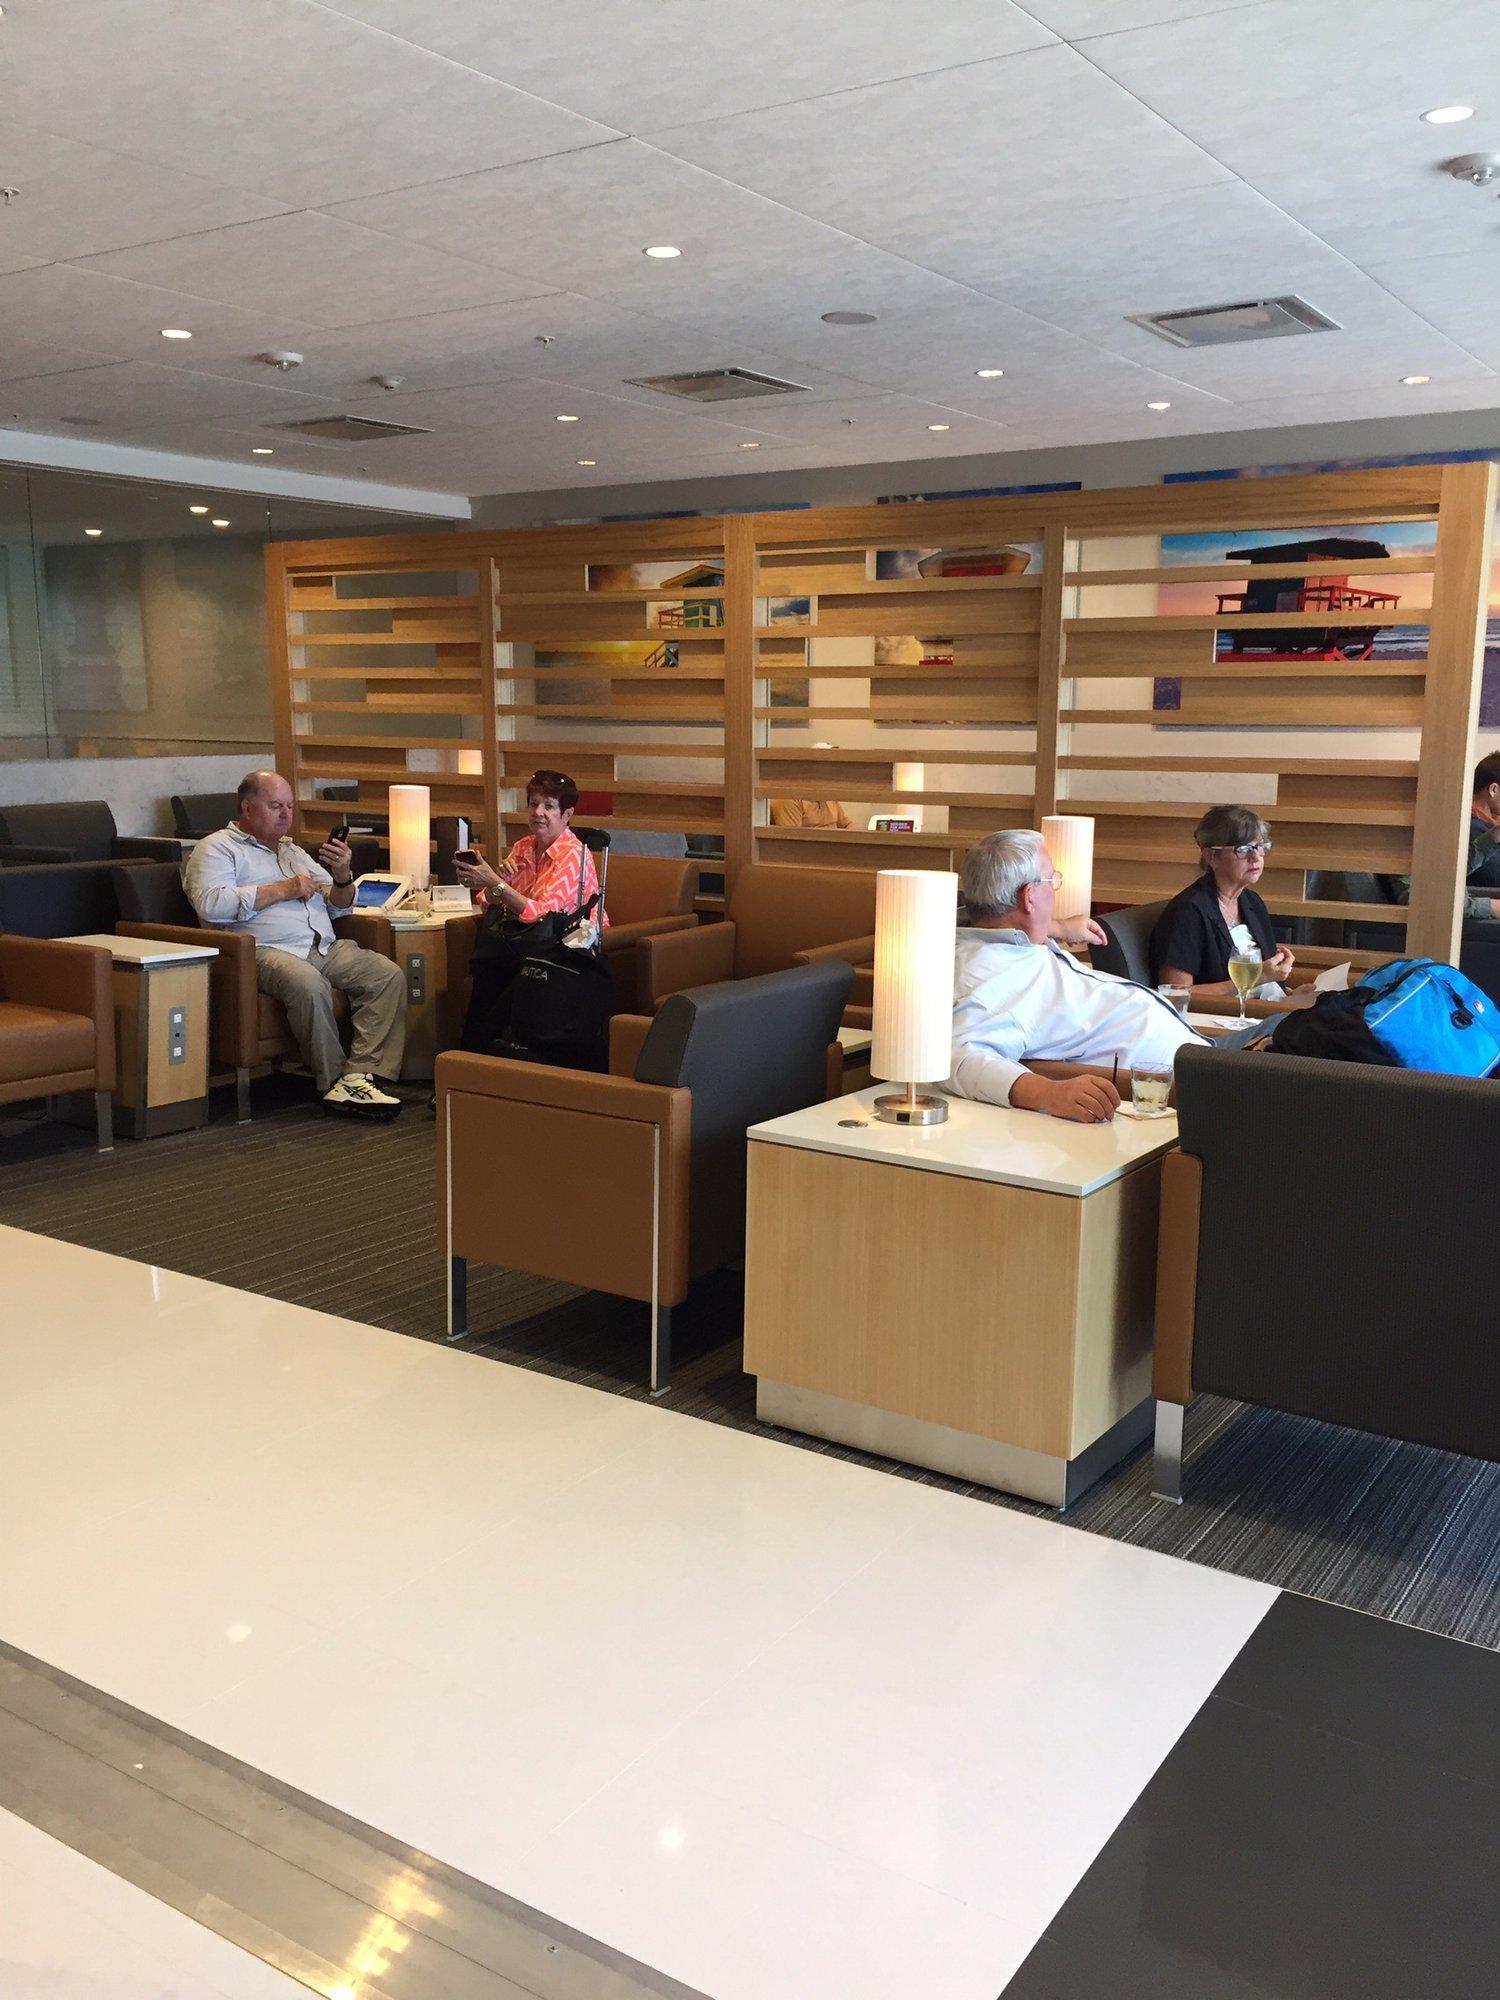 American Airlines Admirals Club (Gate D15) image 19 of 25